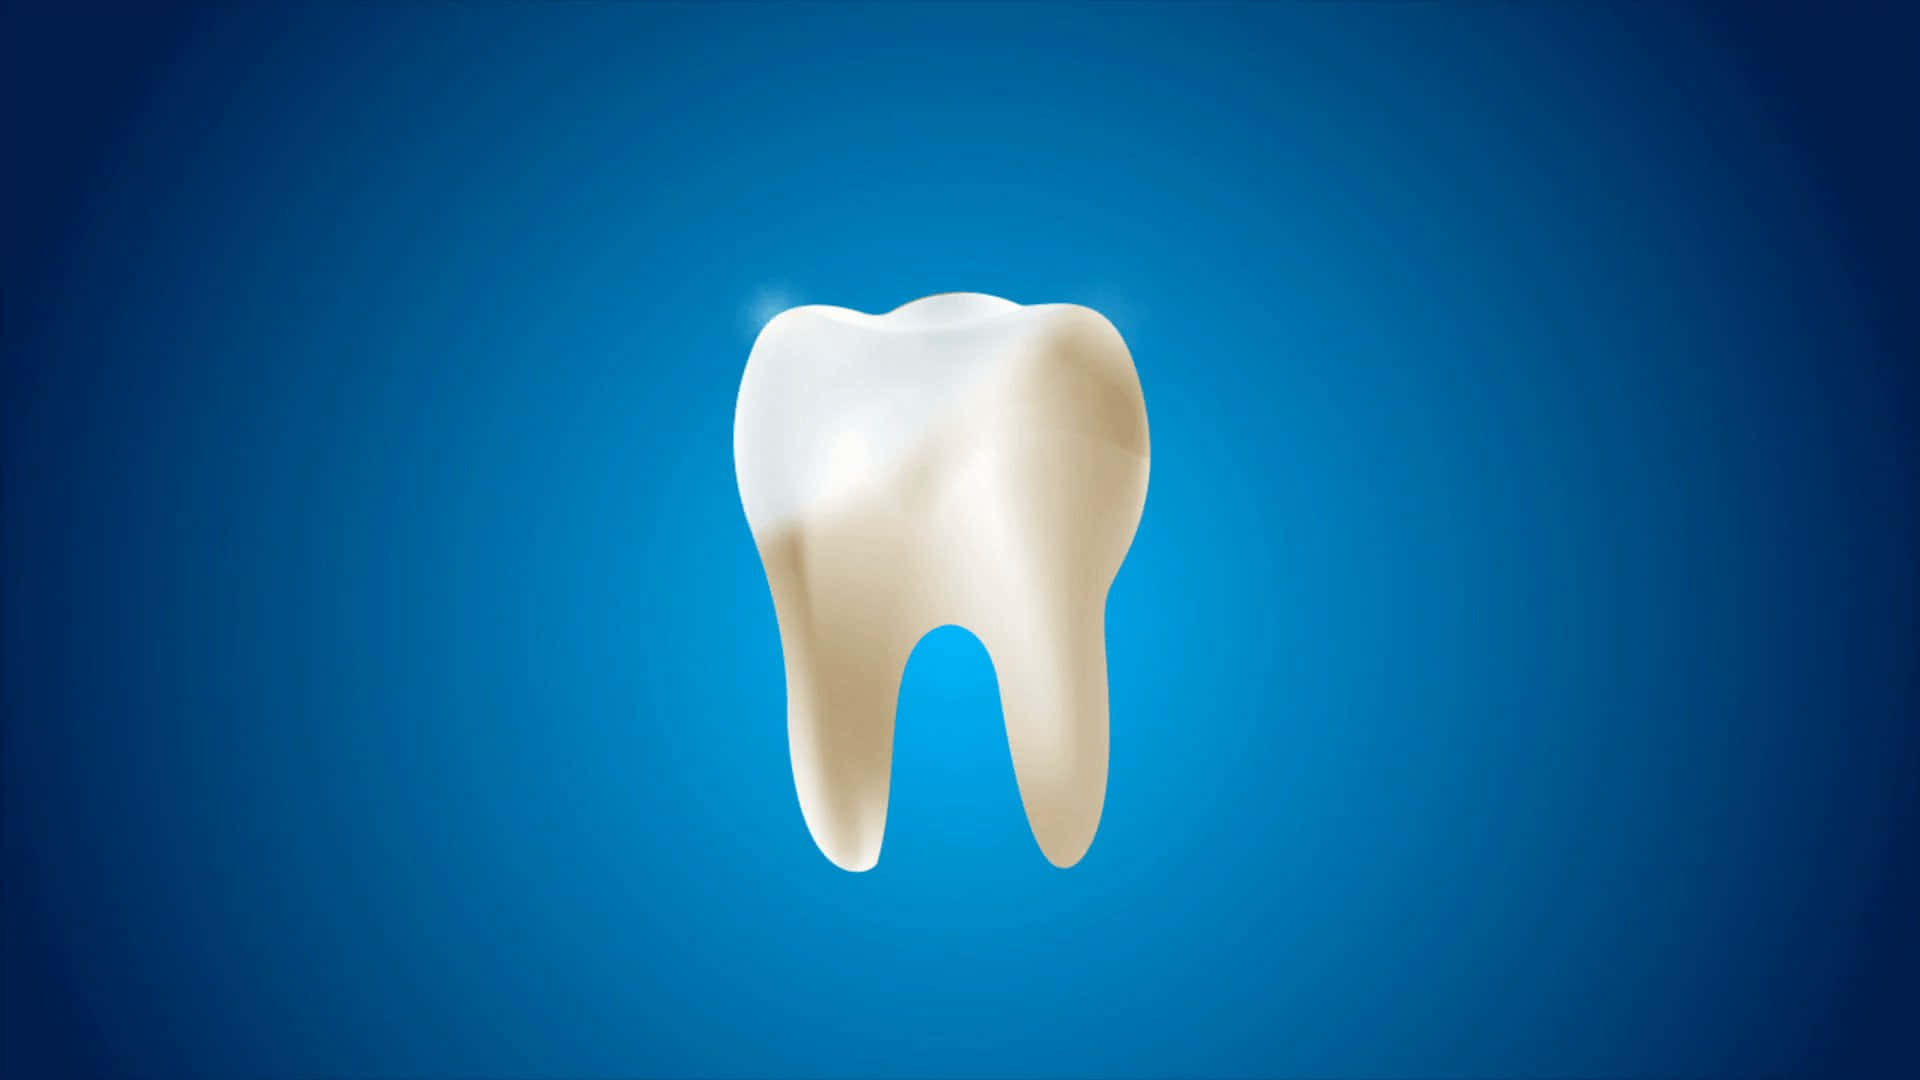 A Tooth On A Blue Background